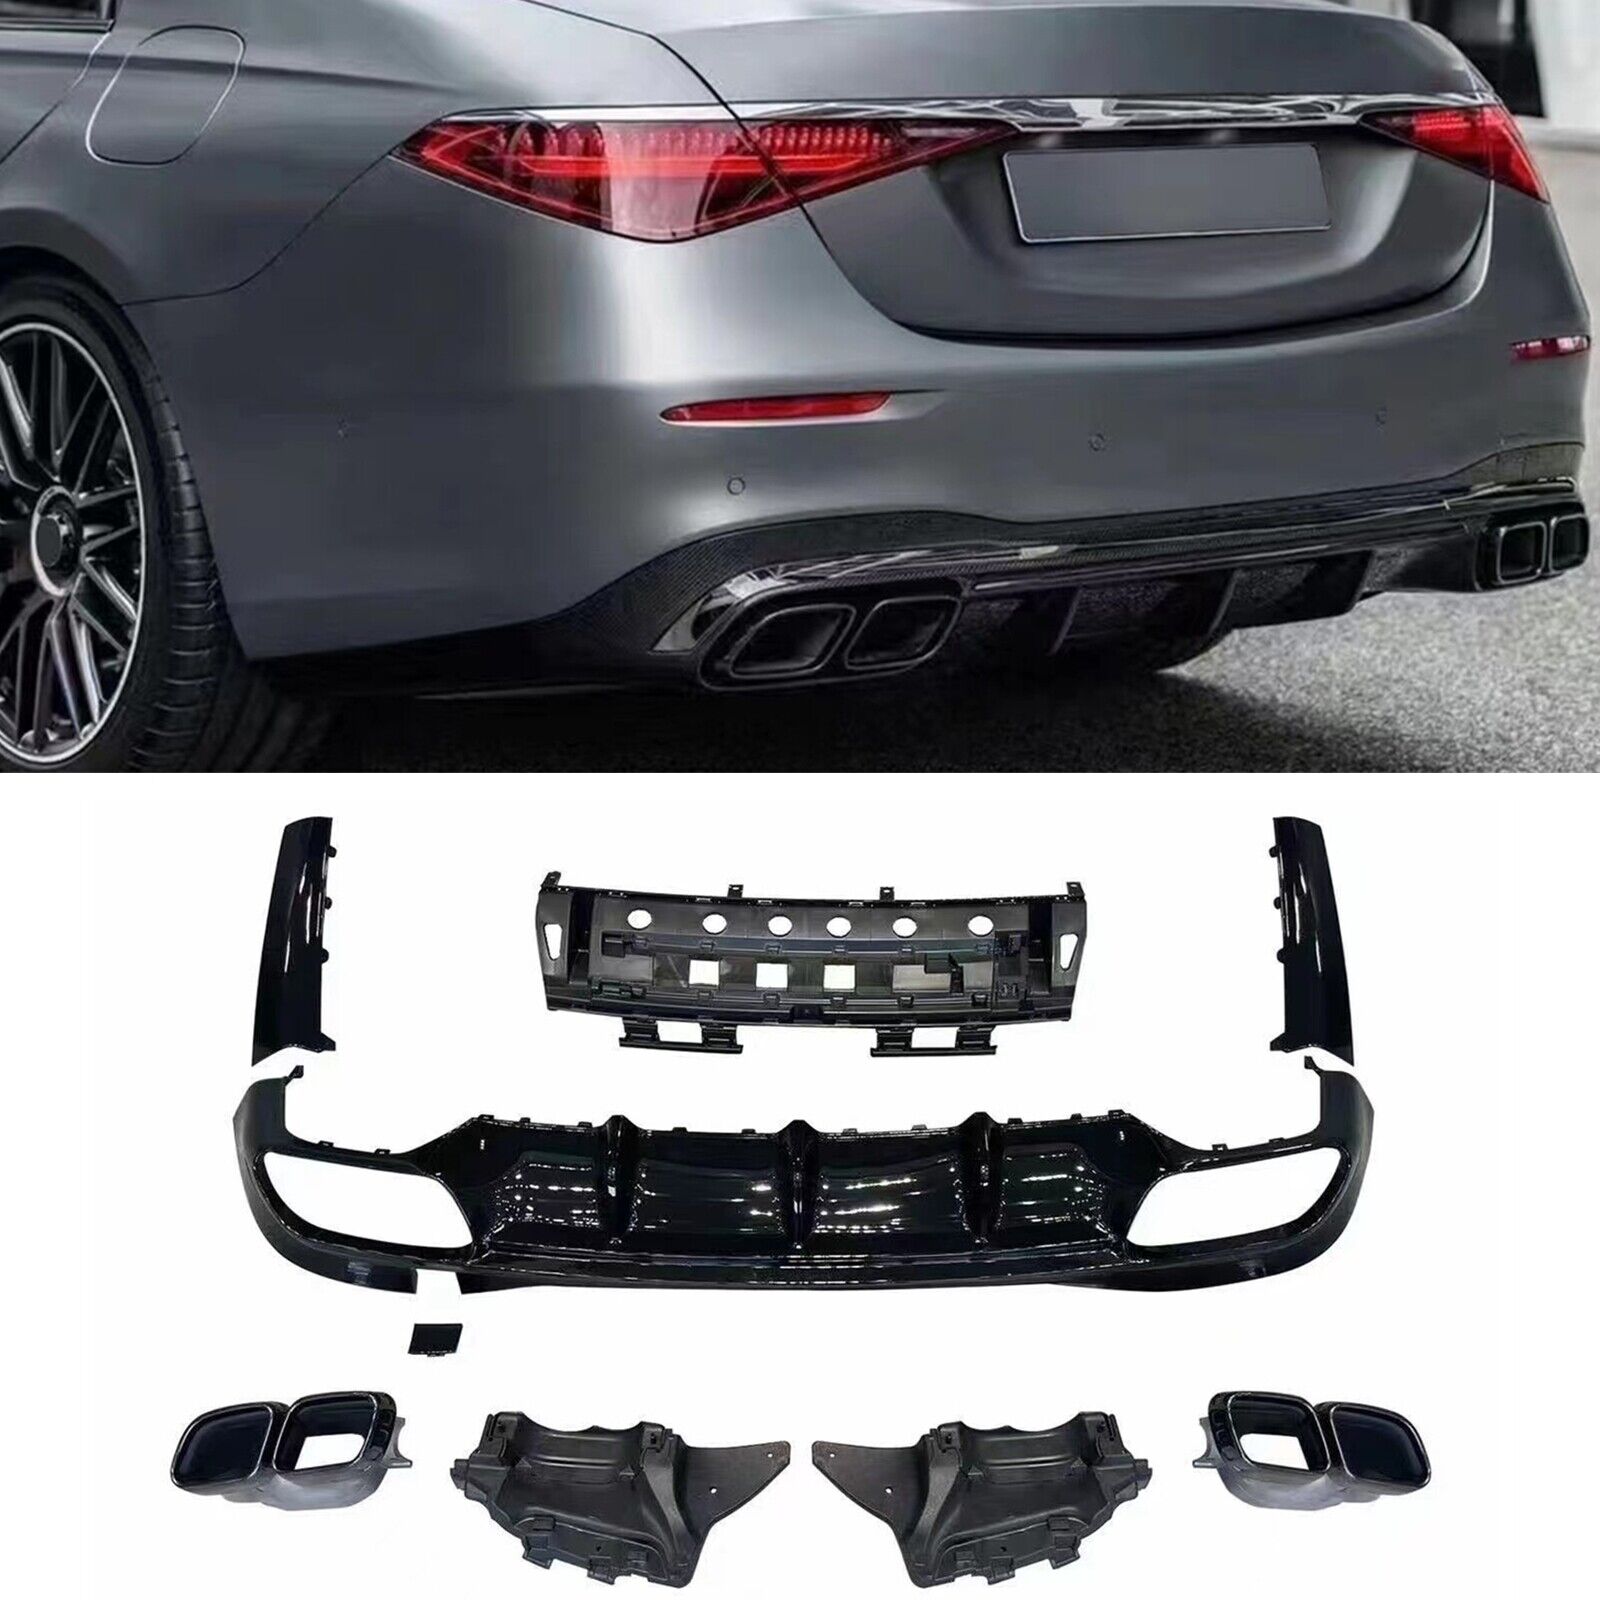 Rear Diffuser + Exhaust Tips Kit For Mercedes Benz S Class W223 S63 AMG S580 BLK